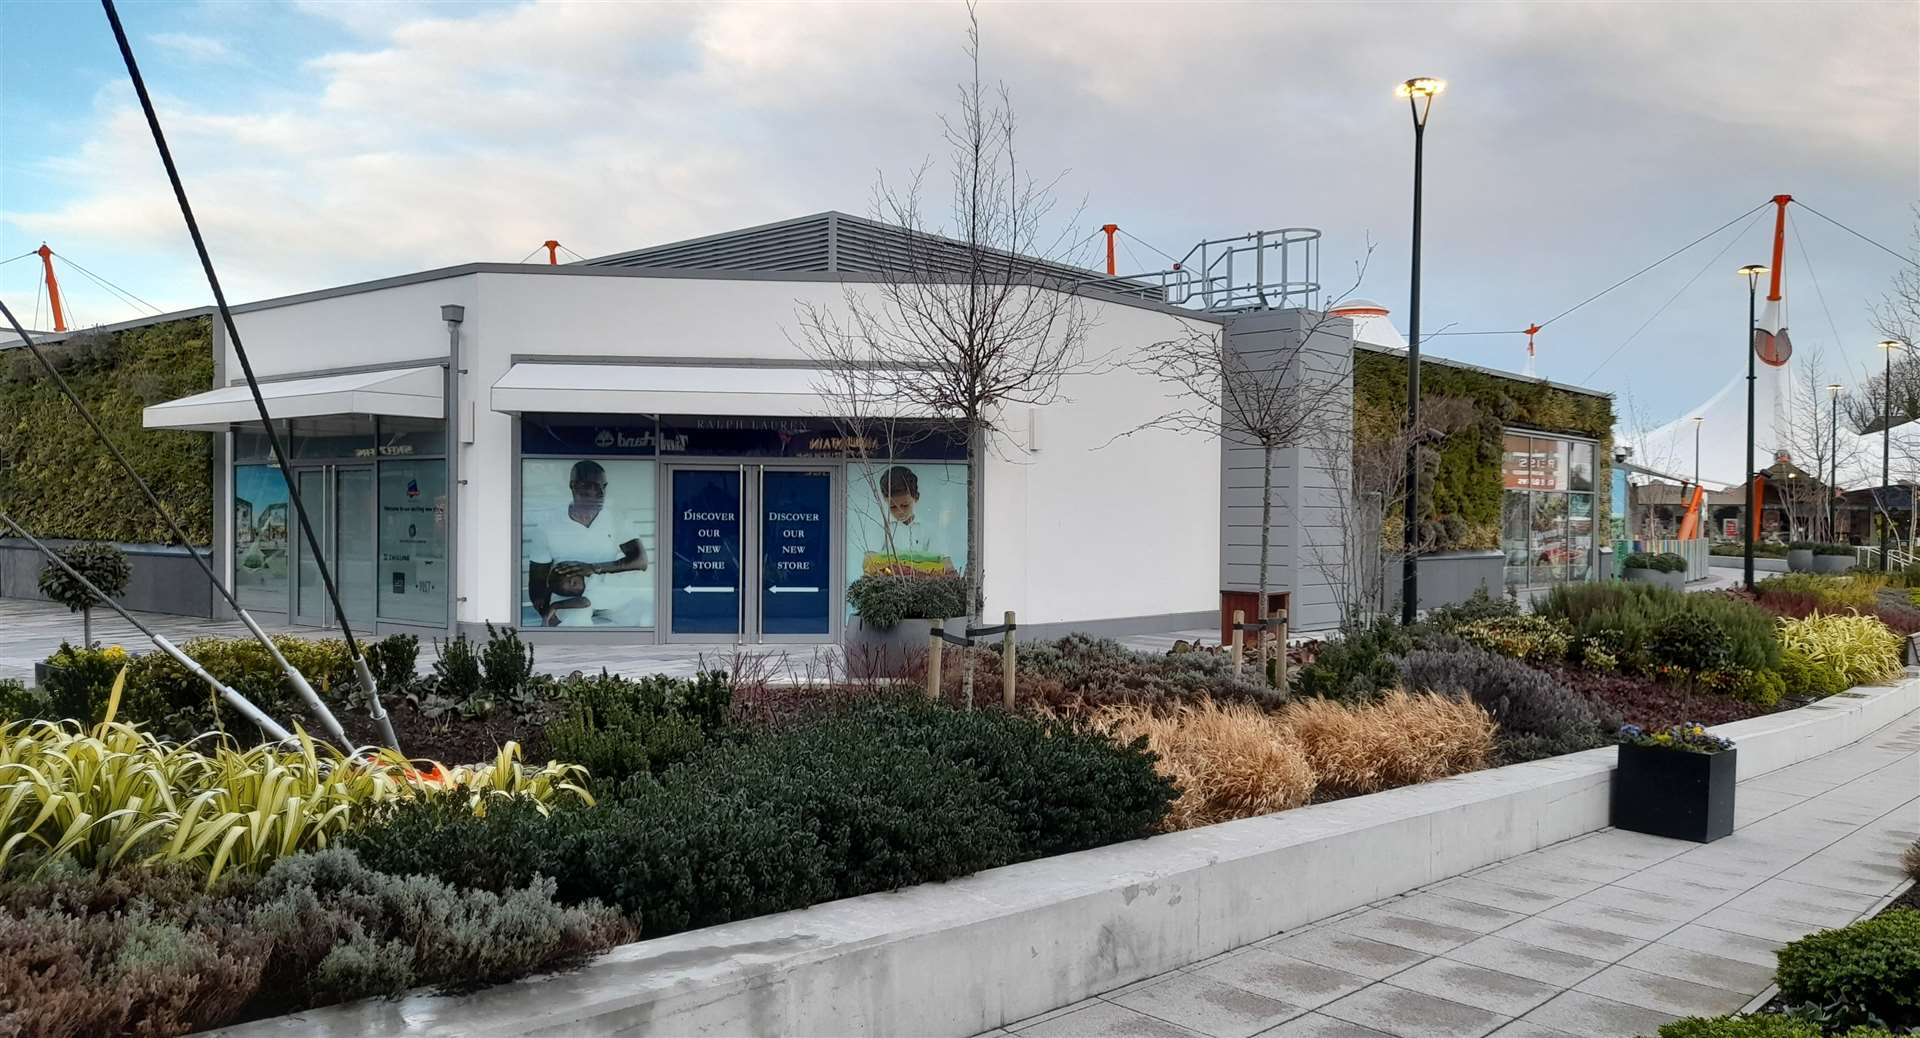 The Outlet's £90m extension opened in November 2019, but not all units are occupied